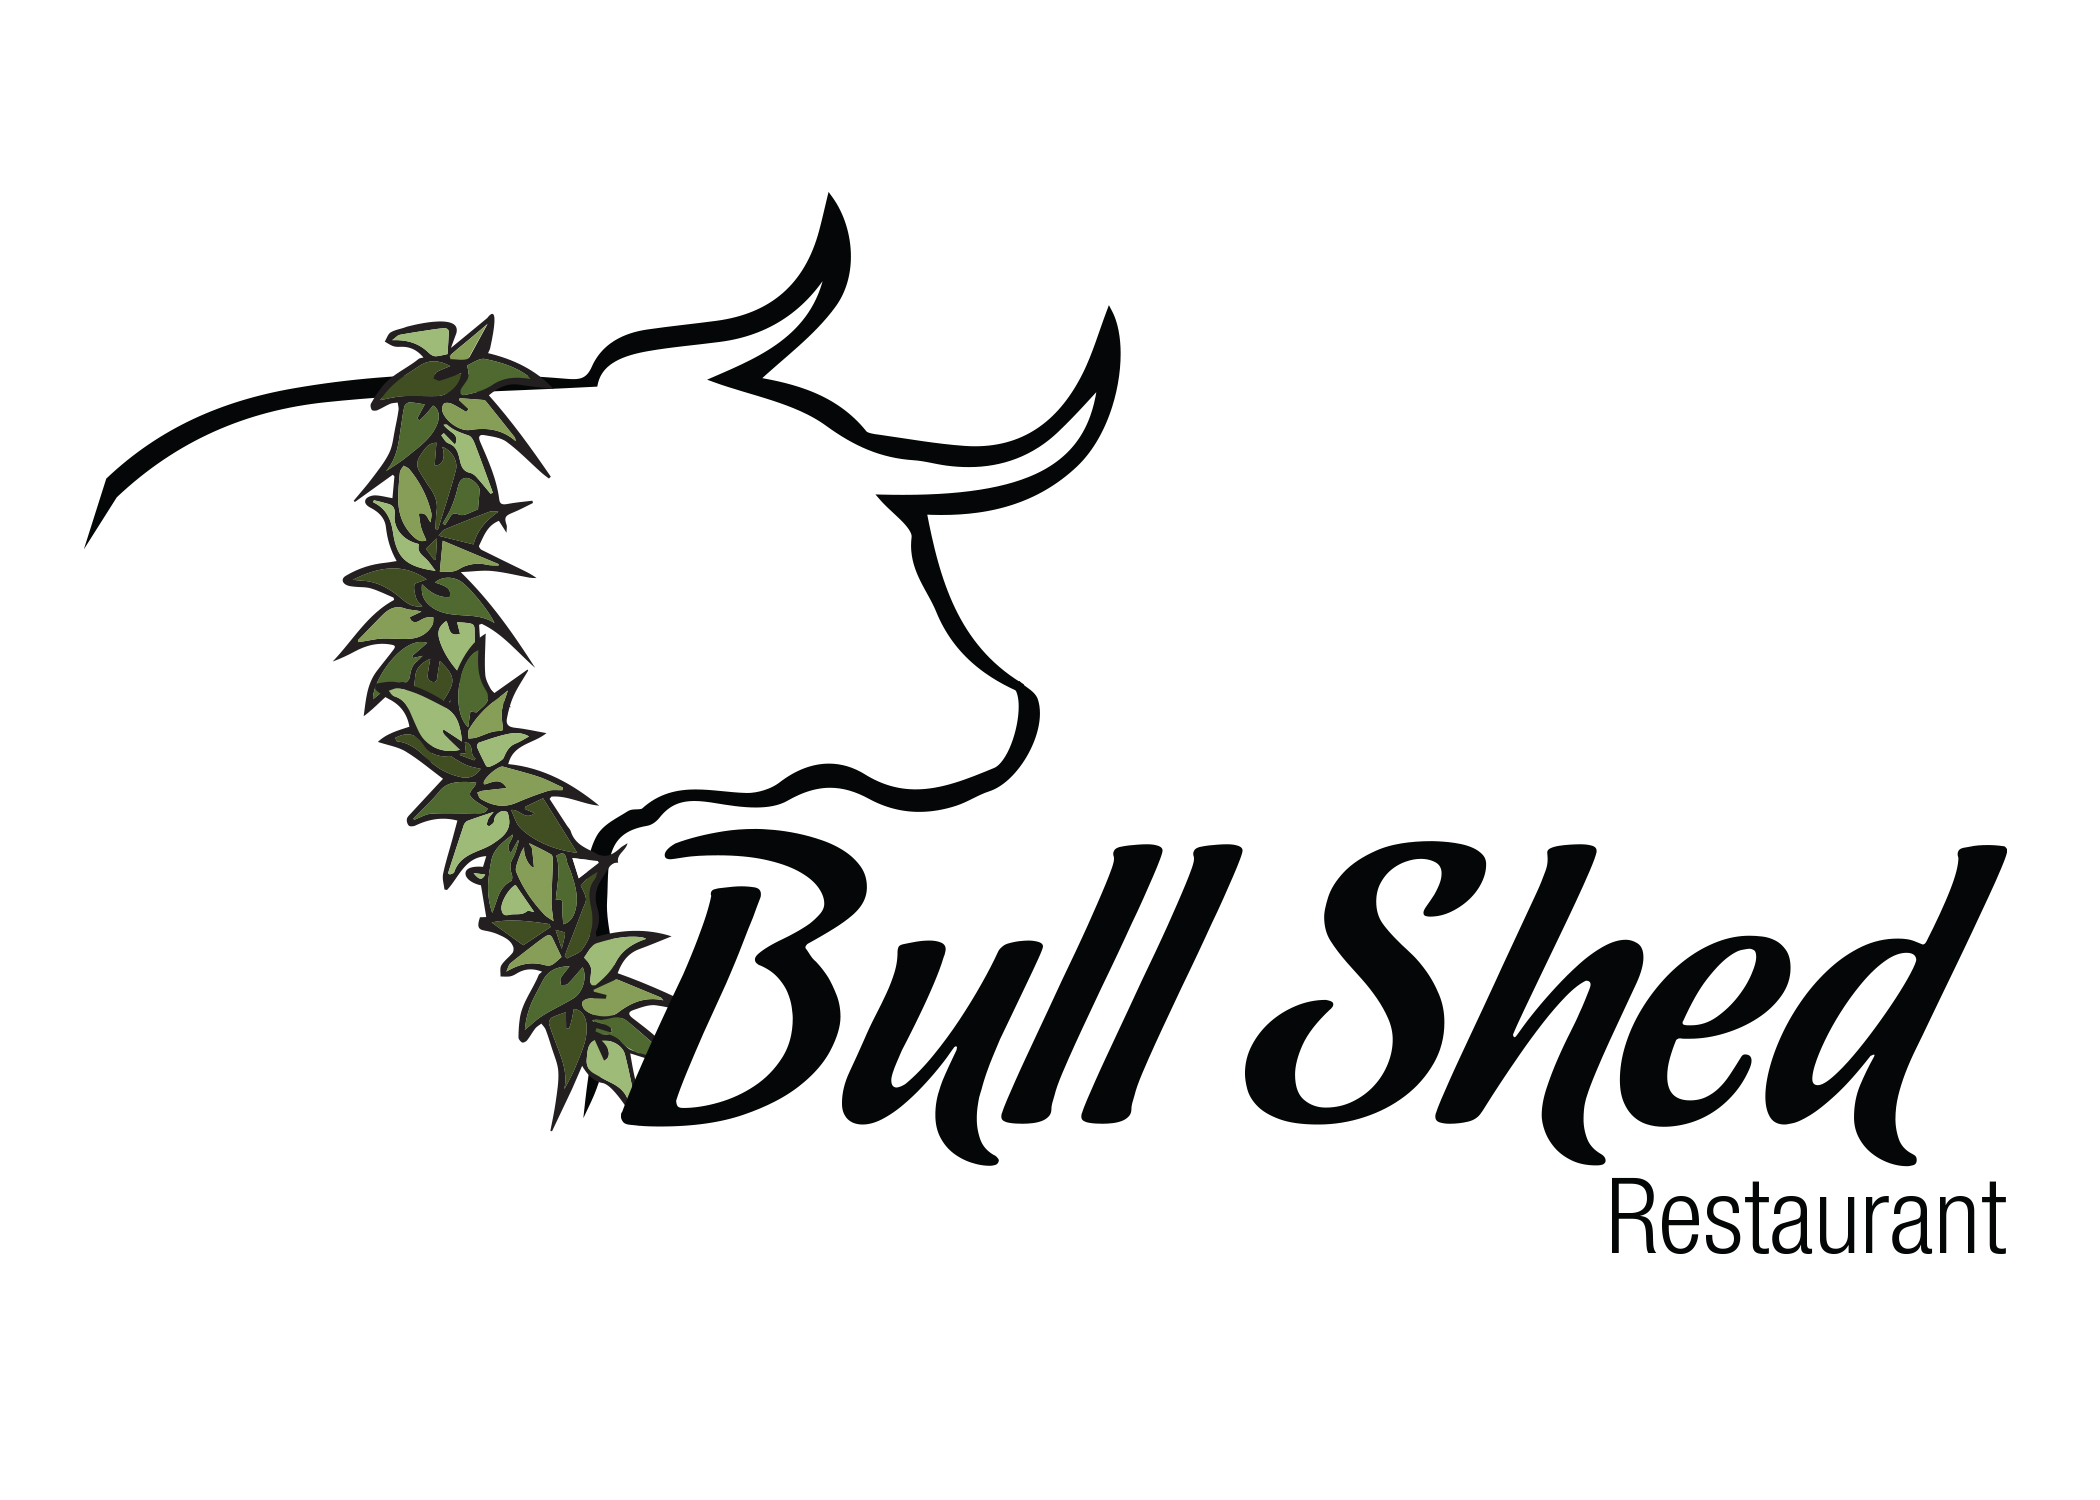 The Bull Shed Restaurant